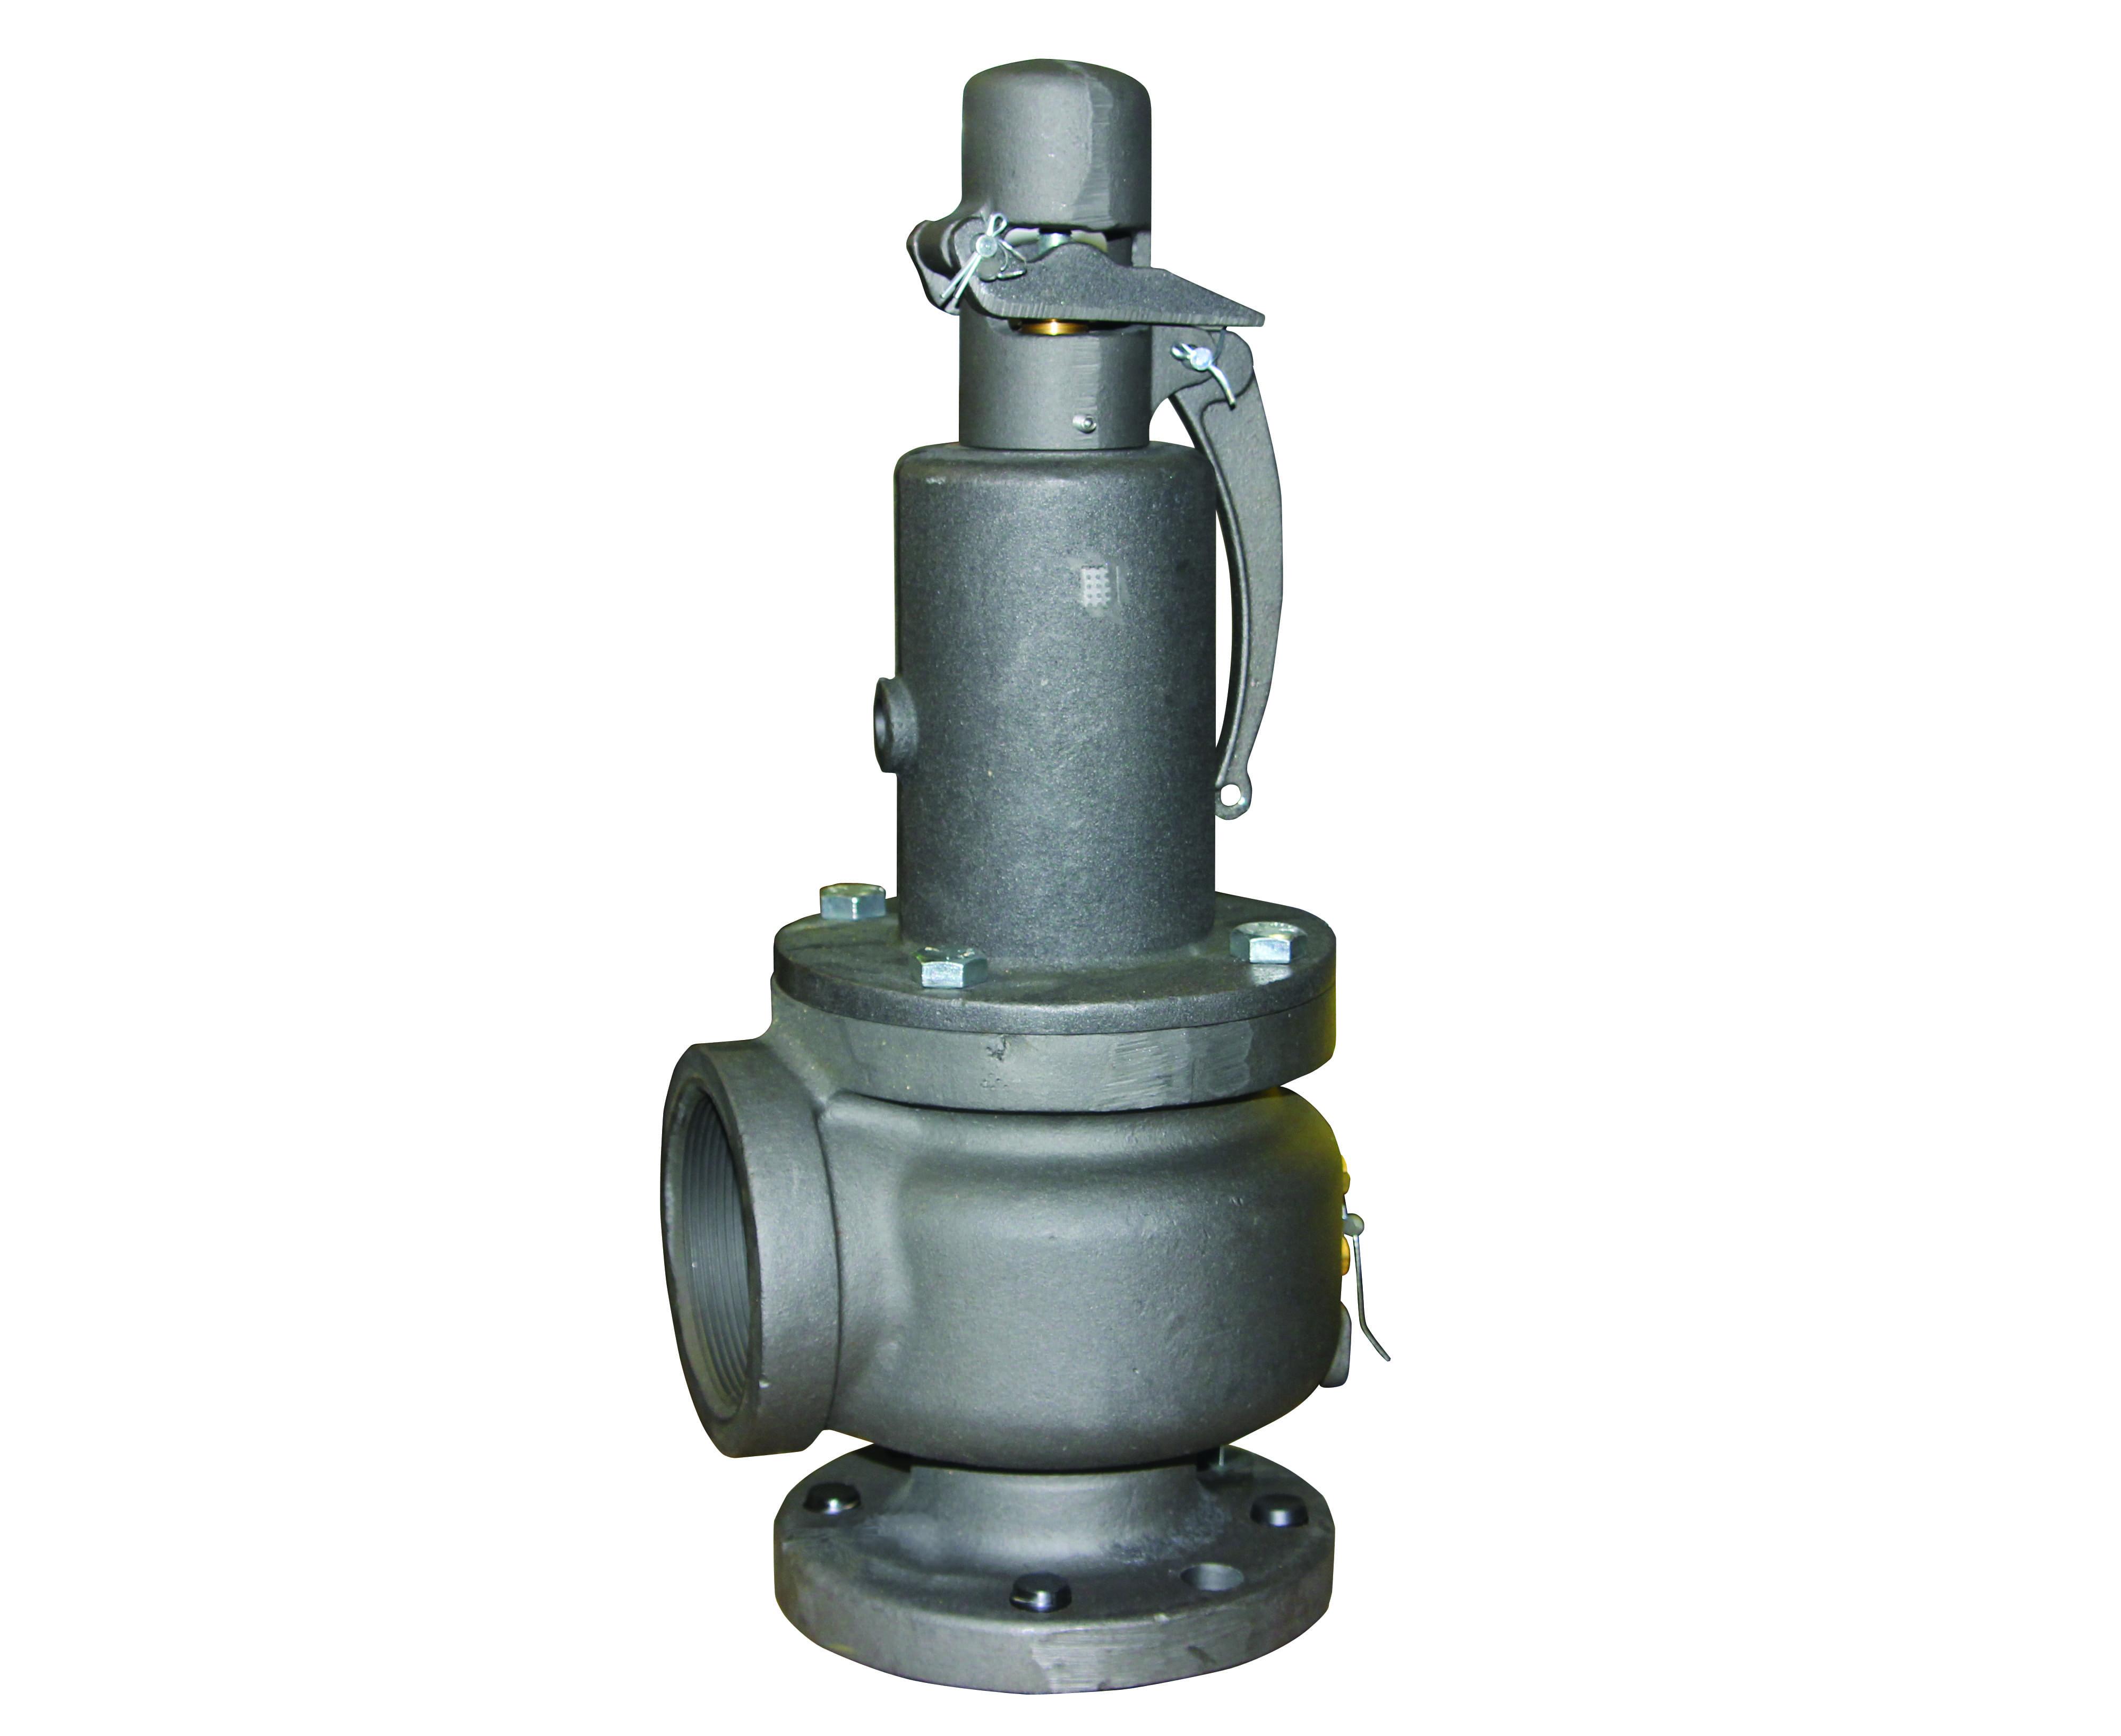 Preview image for Apollo ASME Section VIII Steam Cast Iron Safety Relief Valve, 1-1/2" x 2 1/2" (Flange x FNPT)